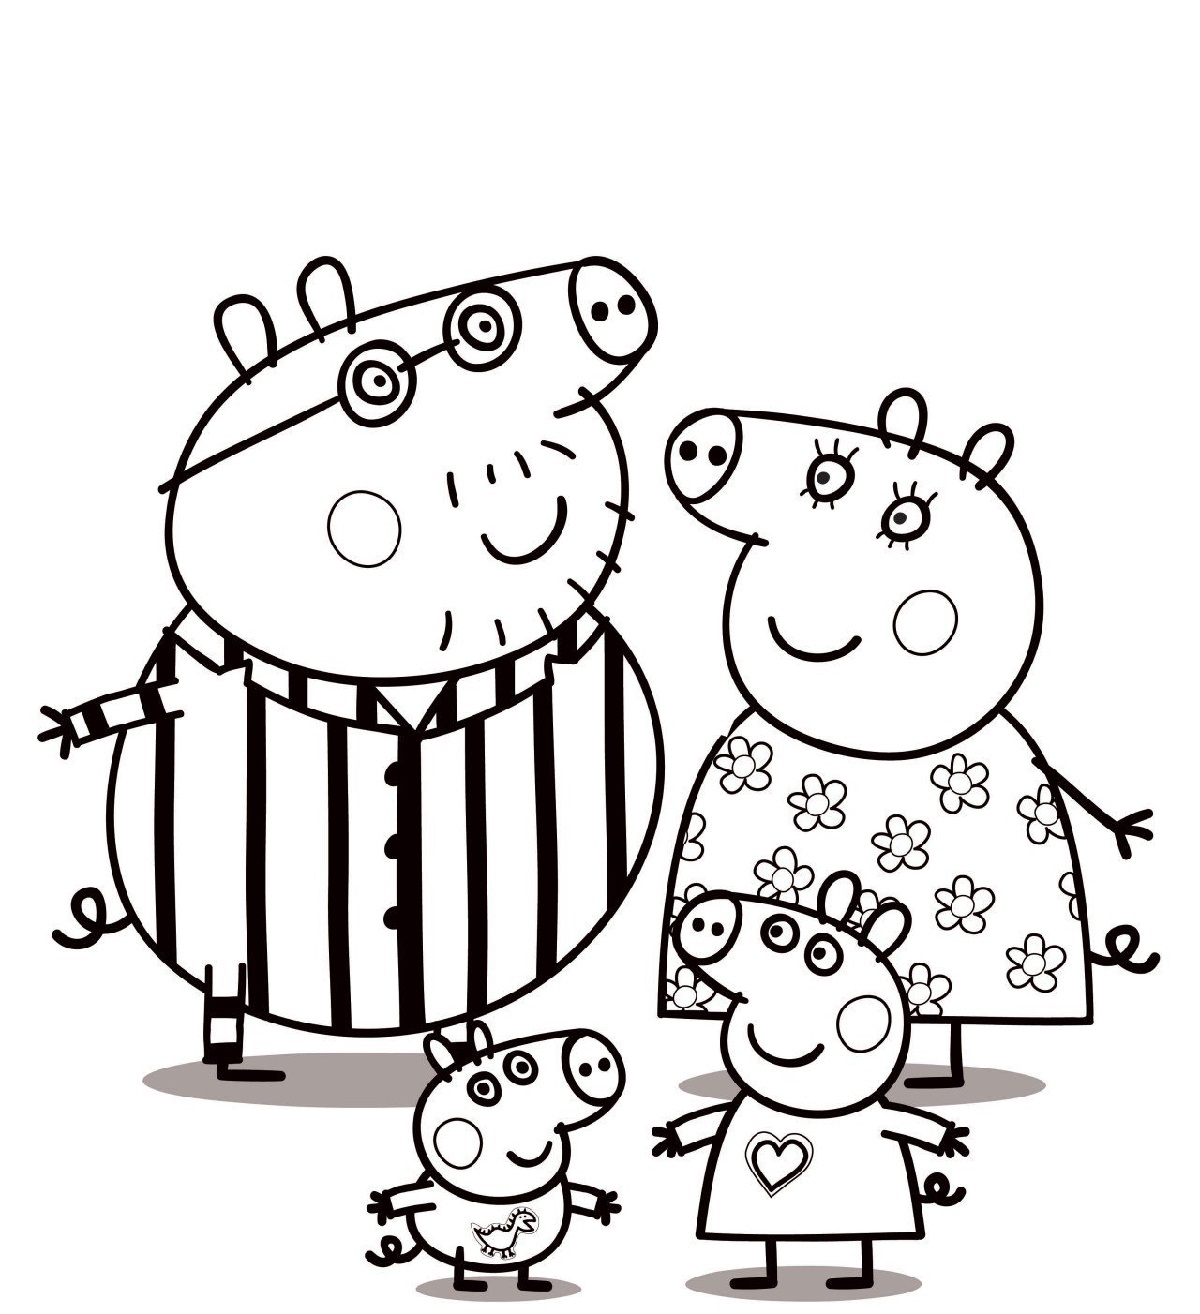 Peppa Pig Coloring Pages Printable and Free | 101 Coloring